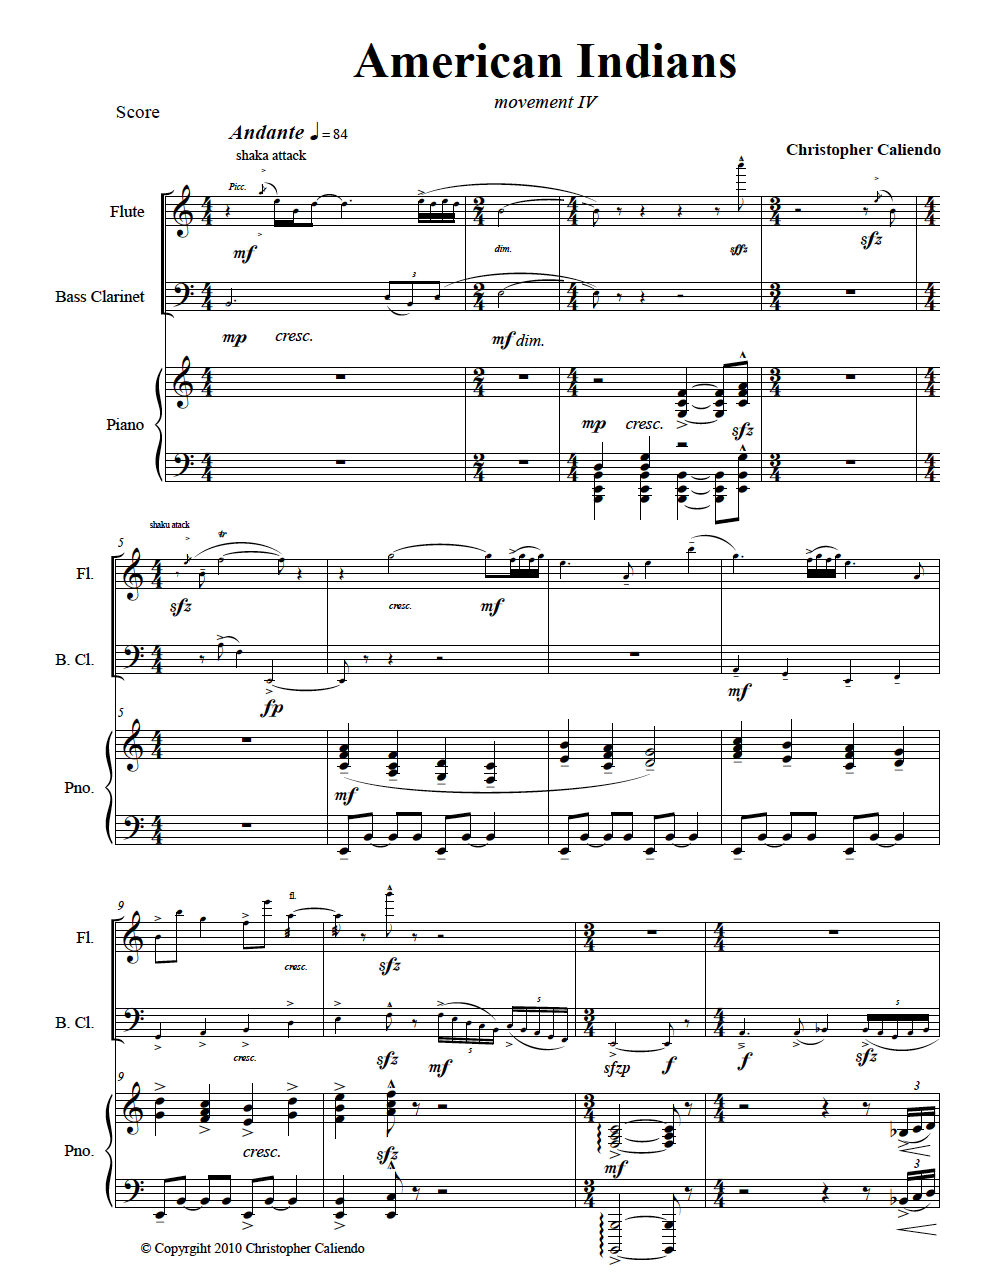 Flute Sheet Music: On Top of the World  Clarinet music, Flute sheet music, Sheet  music